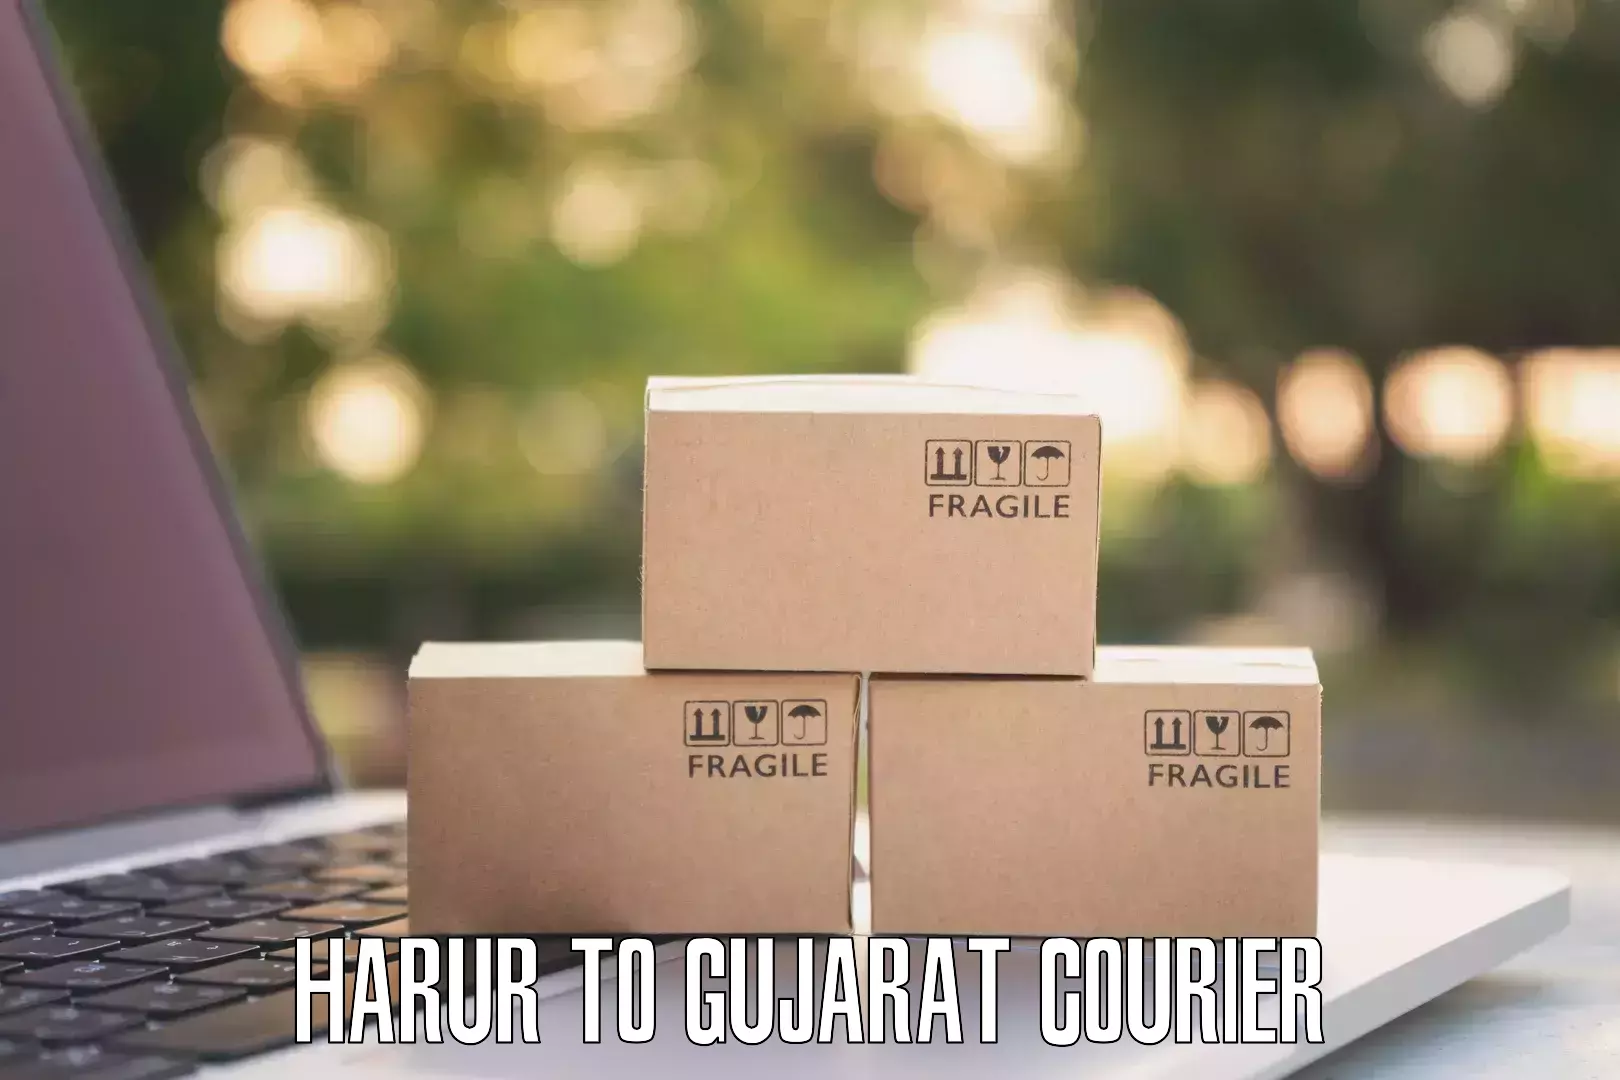 Quality courier partnerships Harur to Bhesan